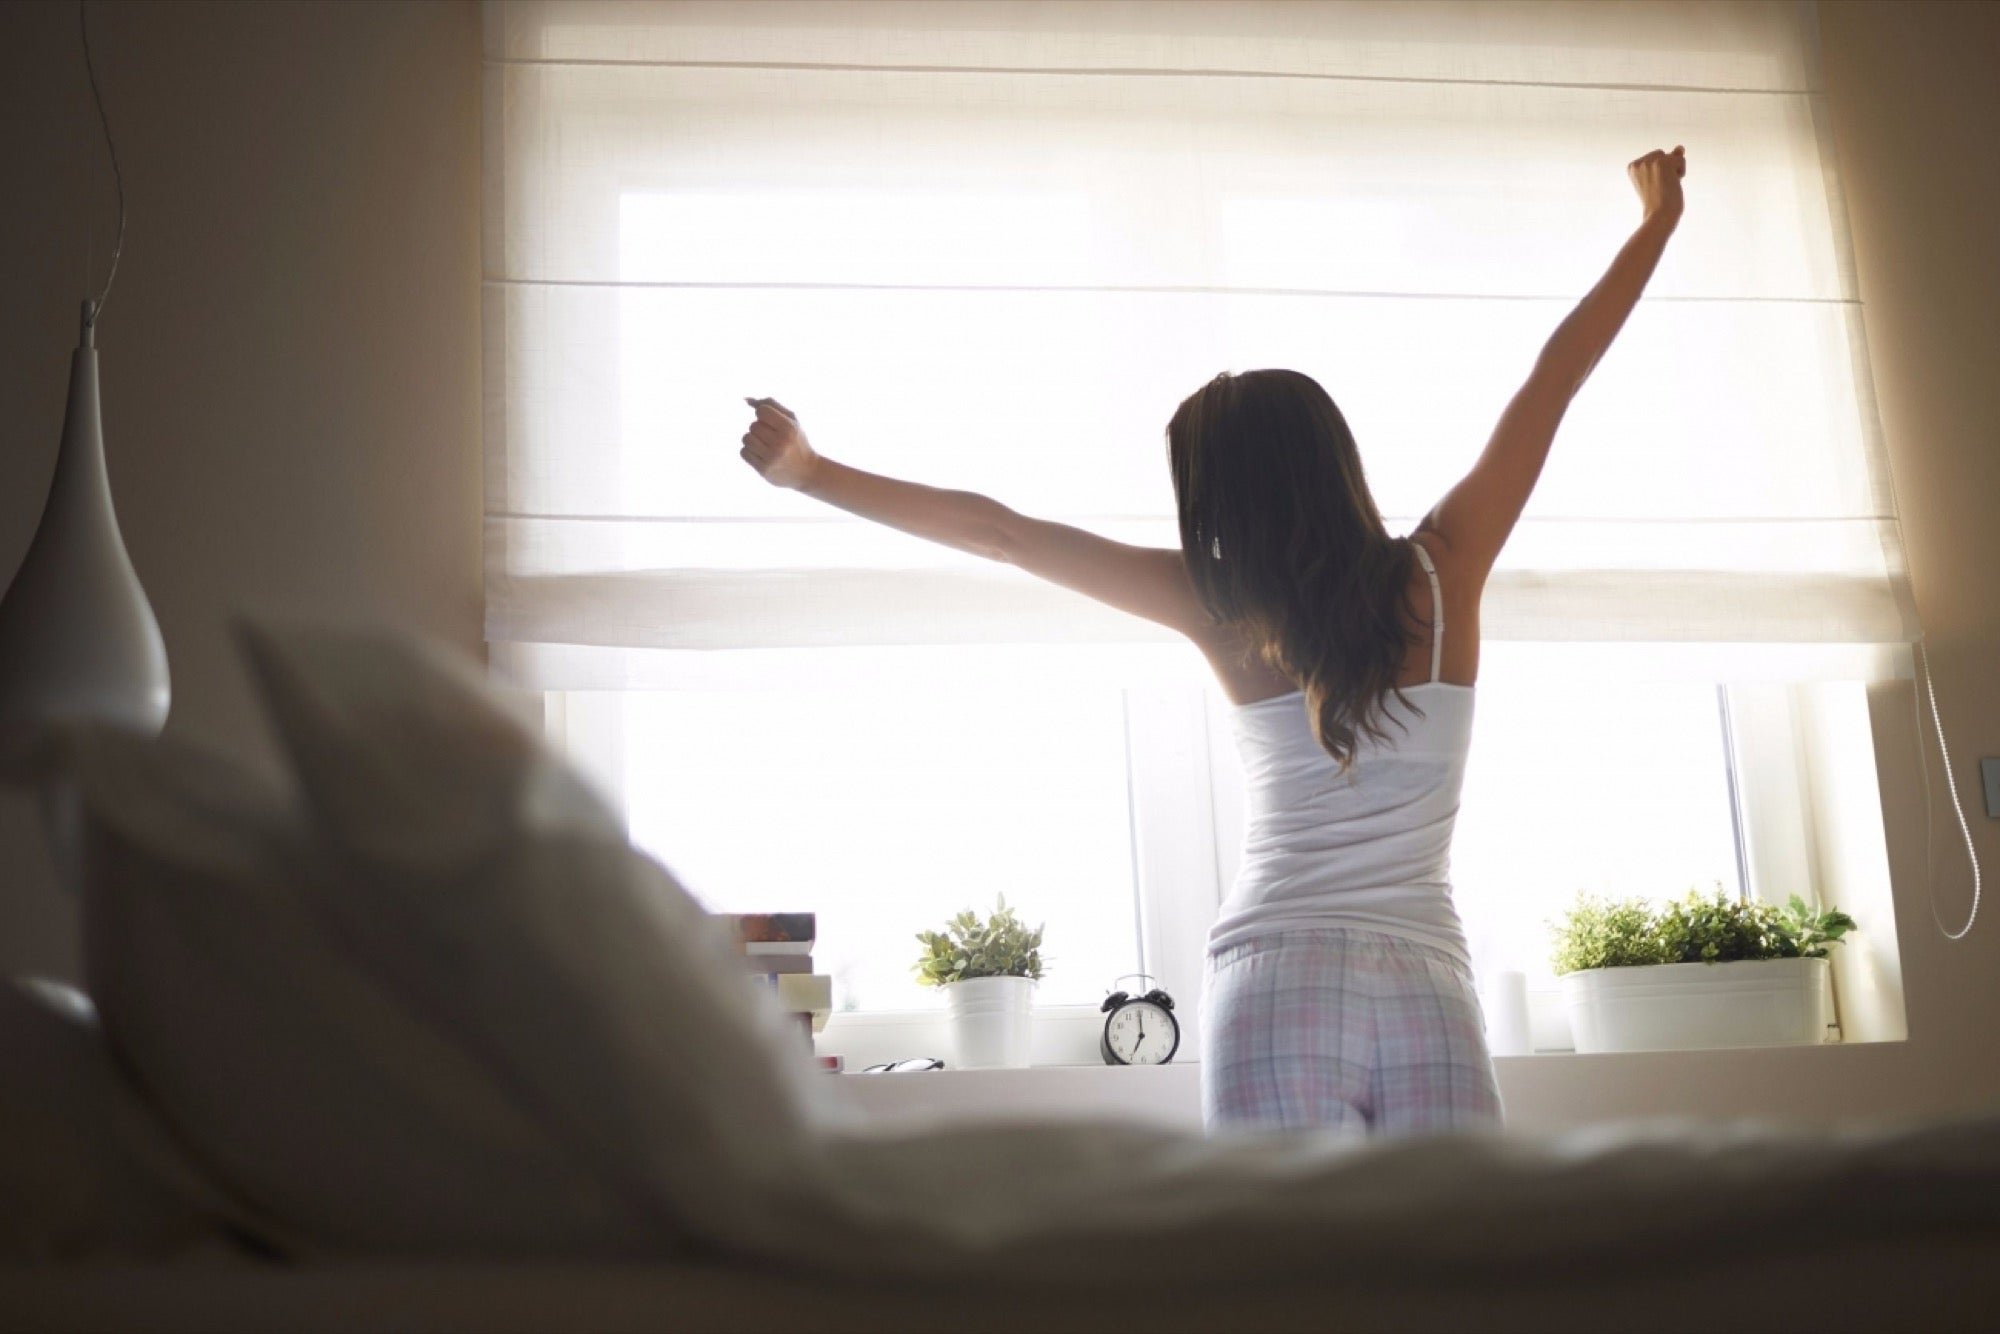 People Who Wake Up Early Make More Money and Have Higher Job Satisfaction, Survey Says